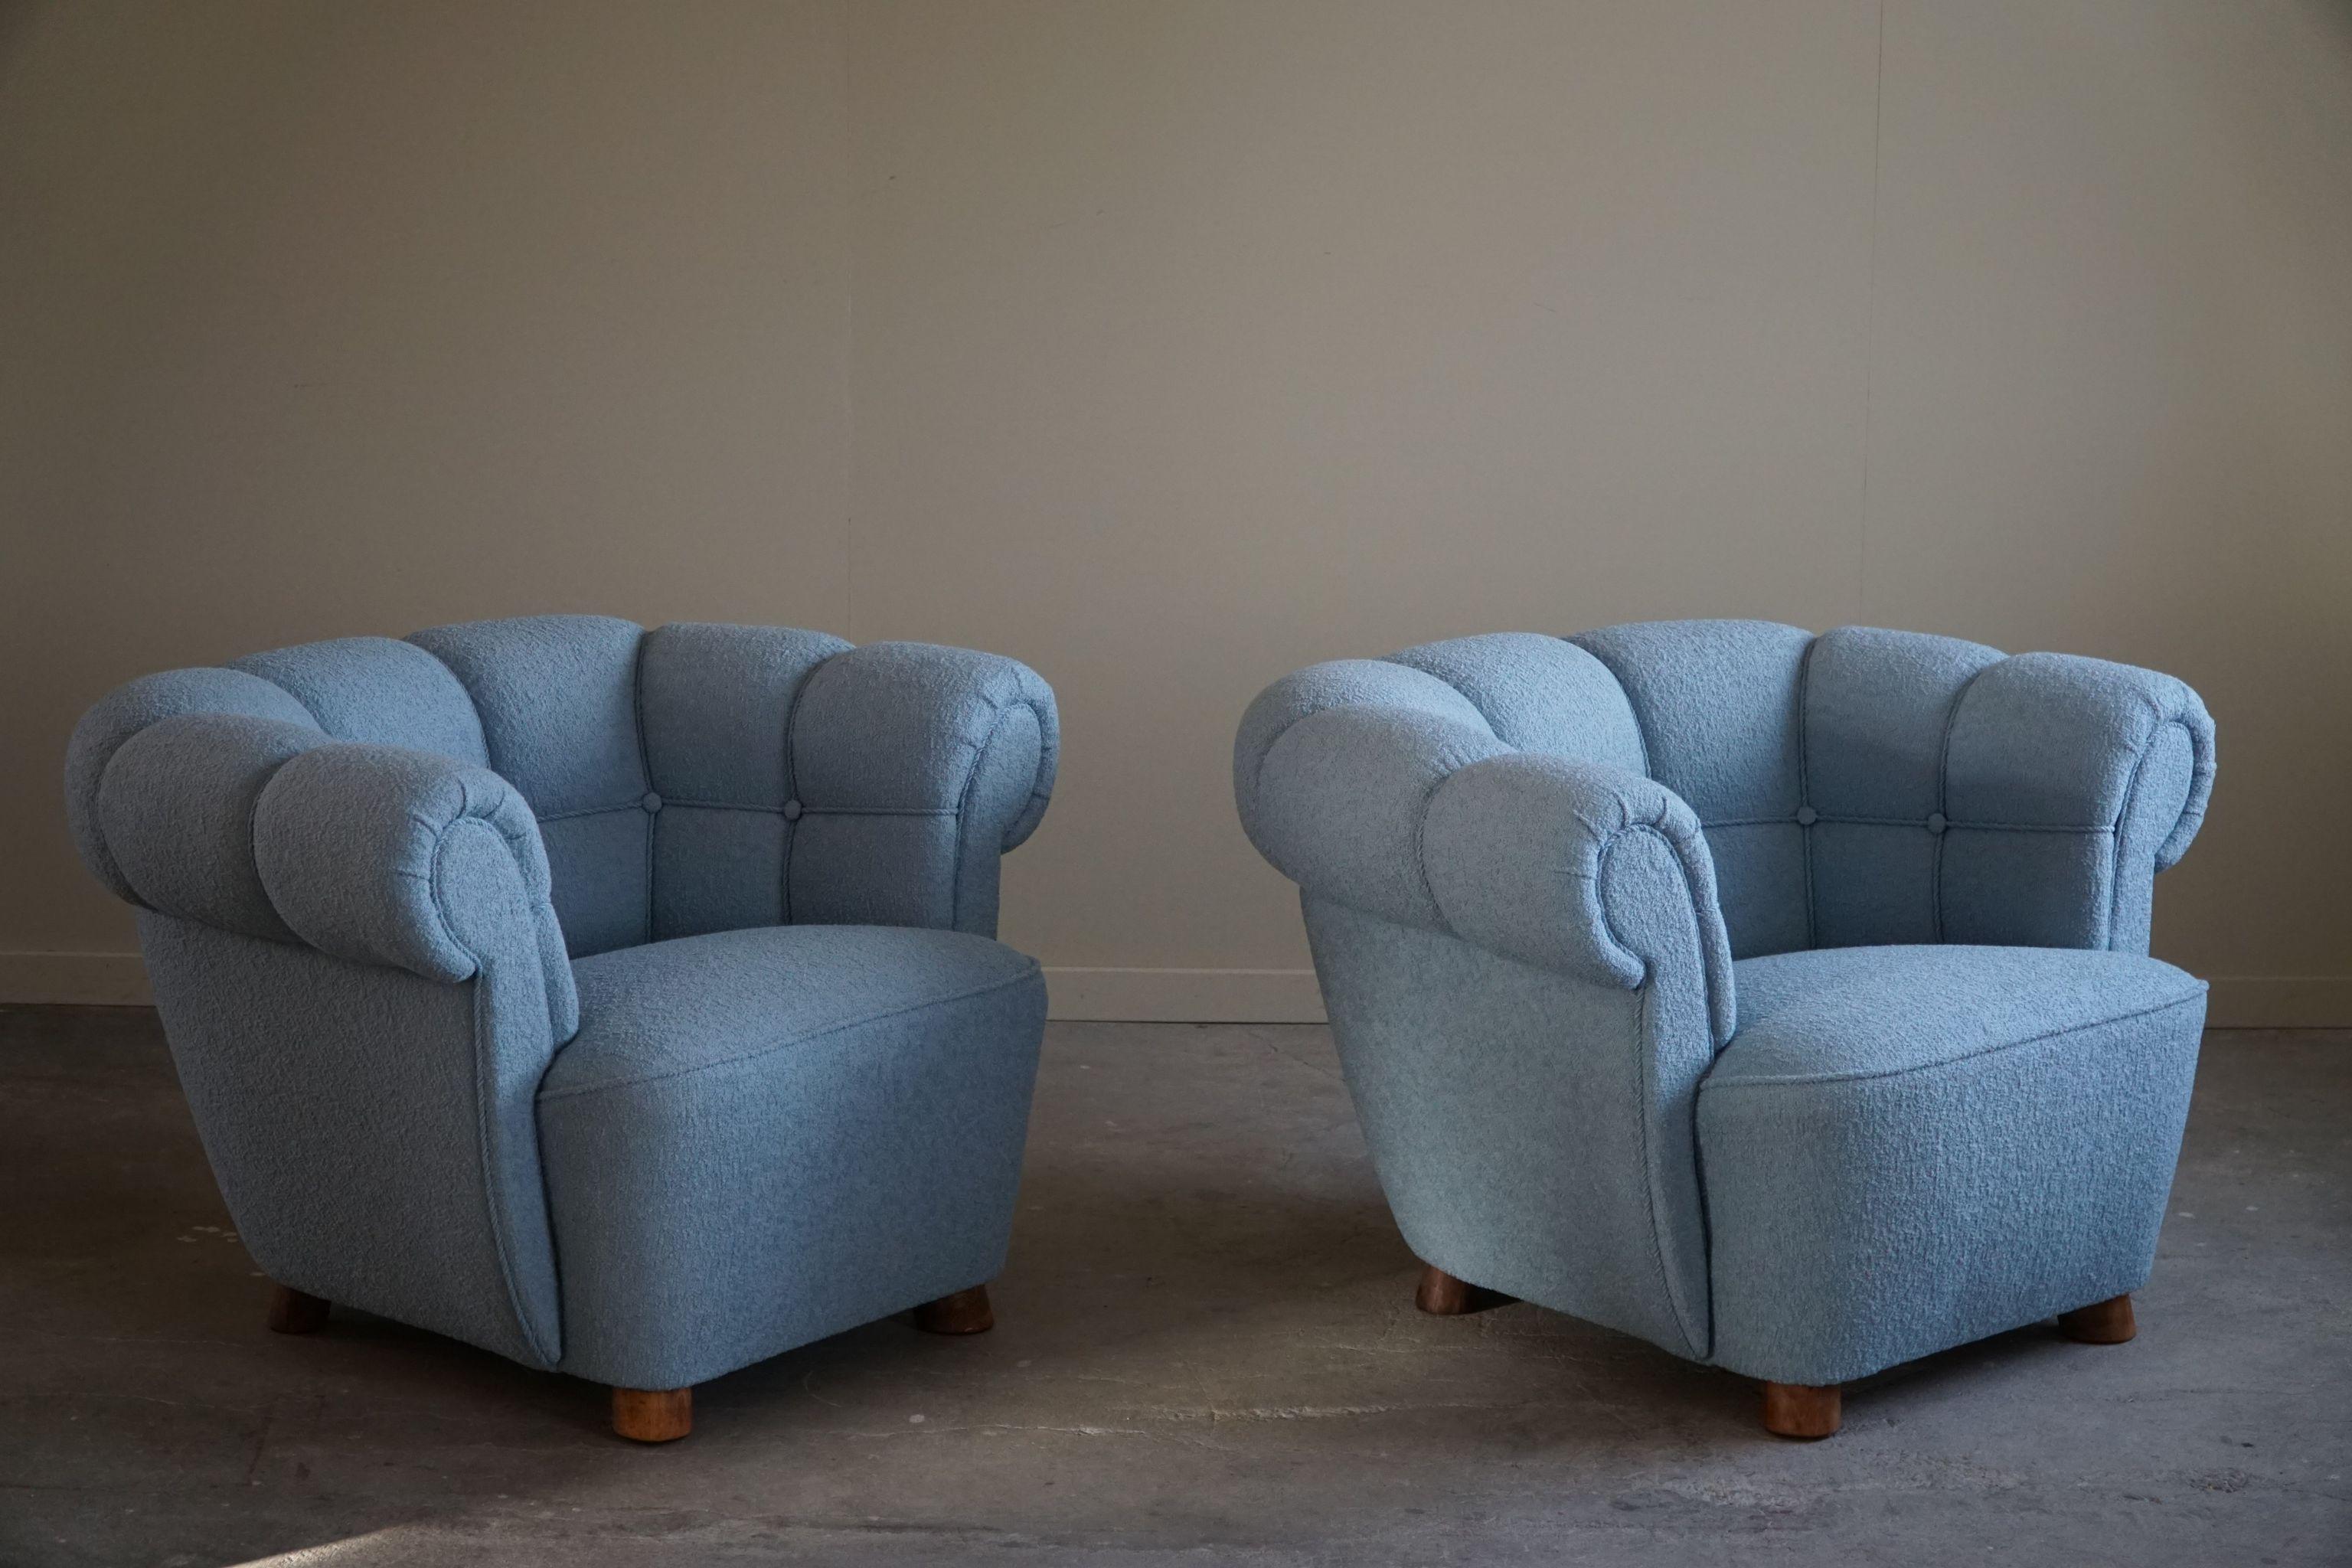 1930s Pair of Lounge Chairs, Reupholstered in Bouclé, Art Deco, Danish Modern For Sale 10